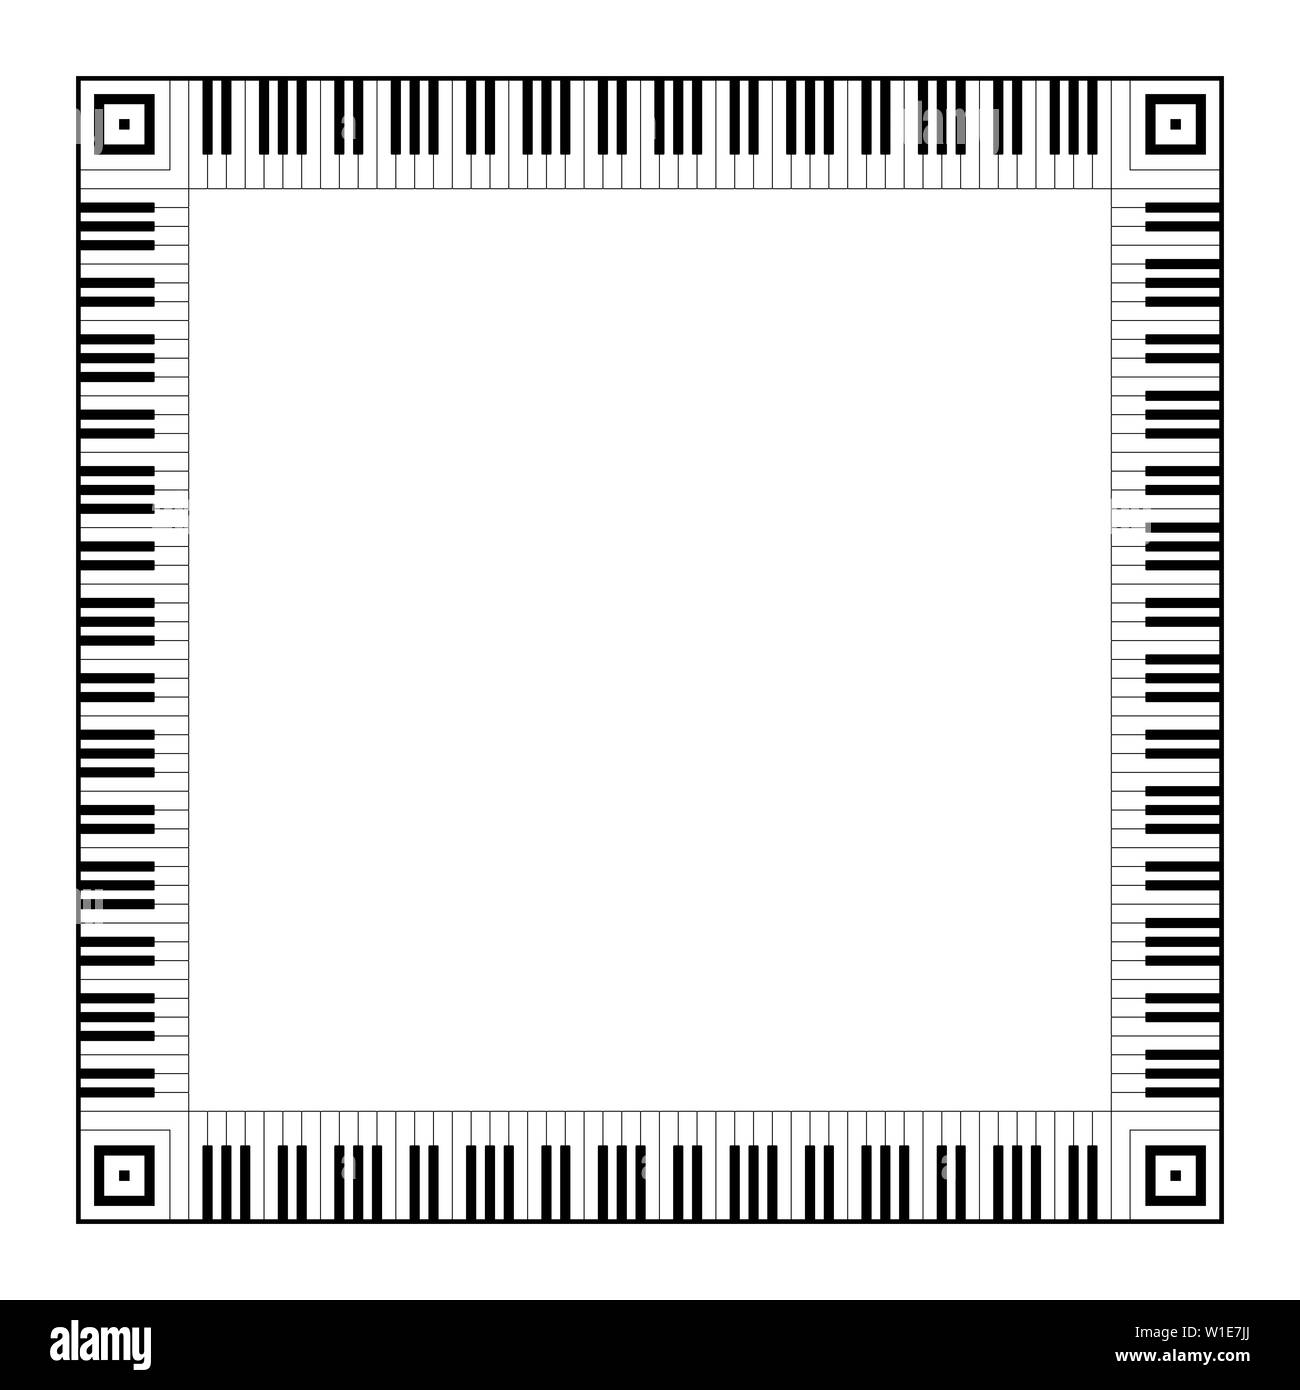 Musical keyboard square frame, made of connected octave patterns. Decorative border, constructed from octaves, black and white keys of piano keyboard. Stock Photo